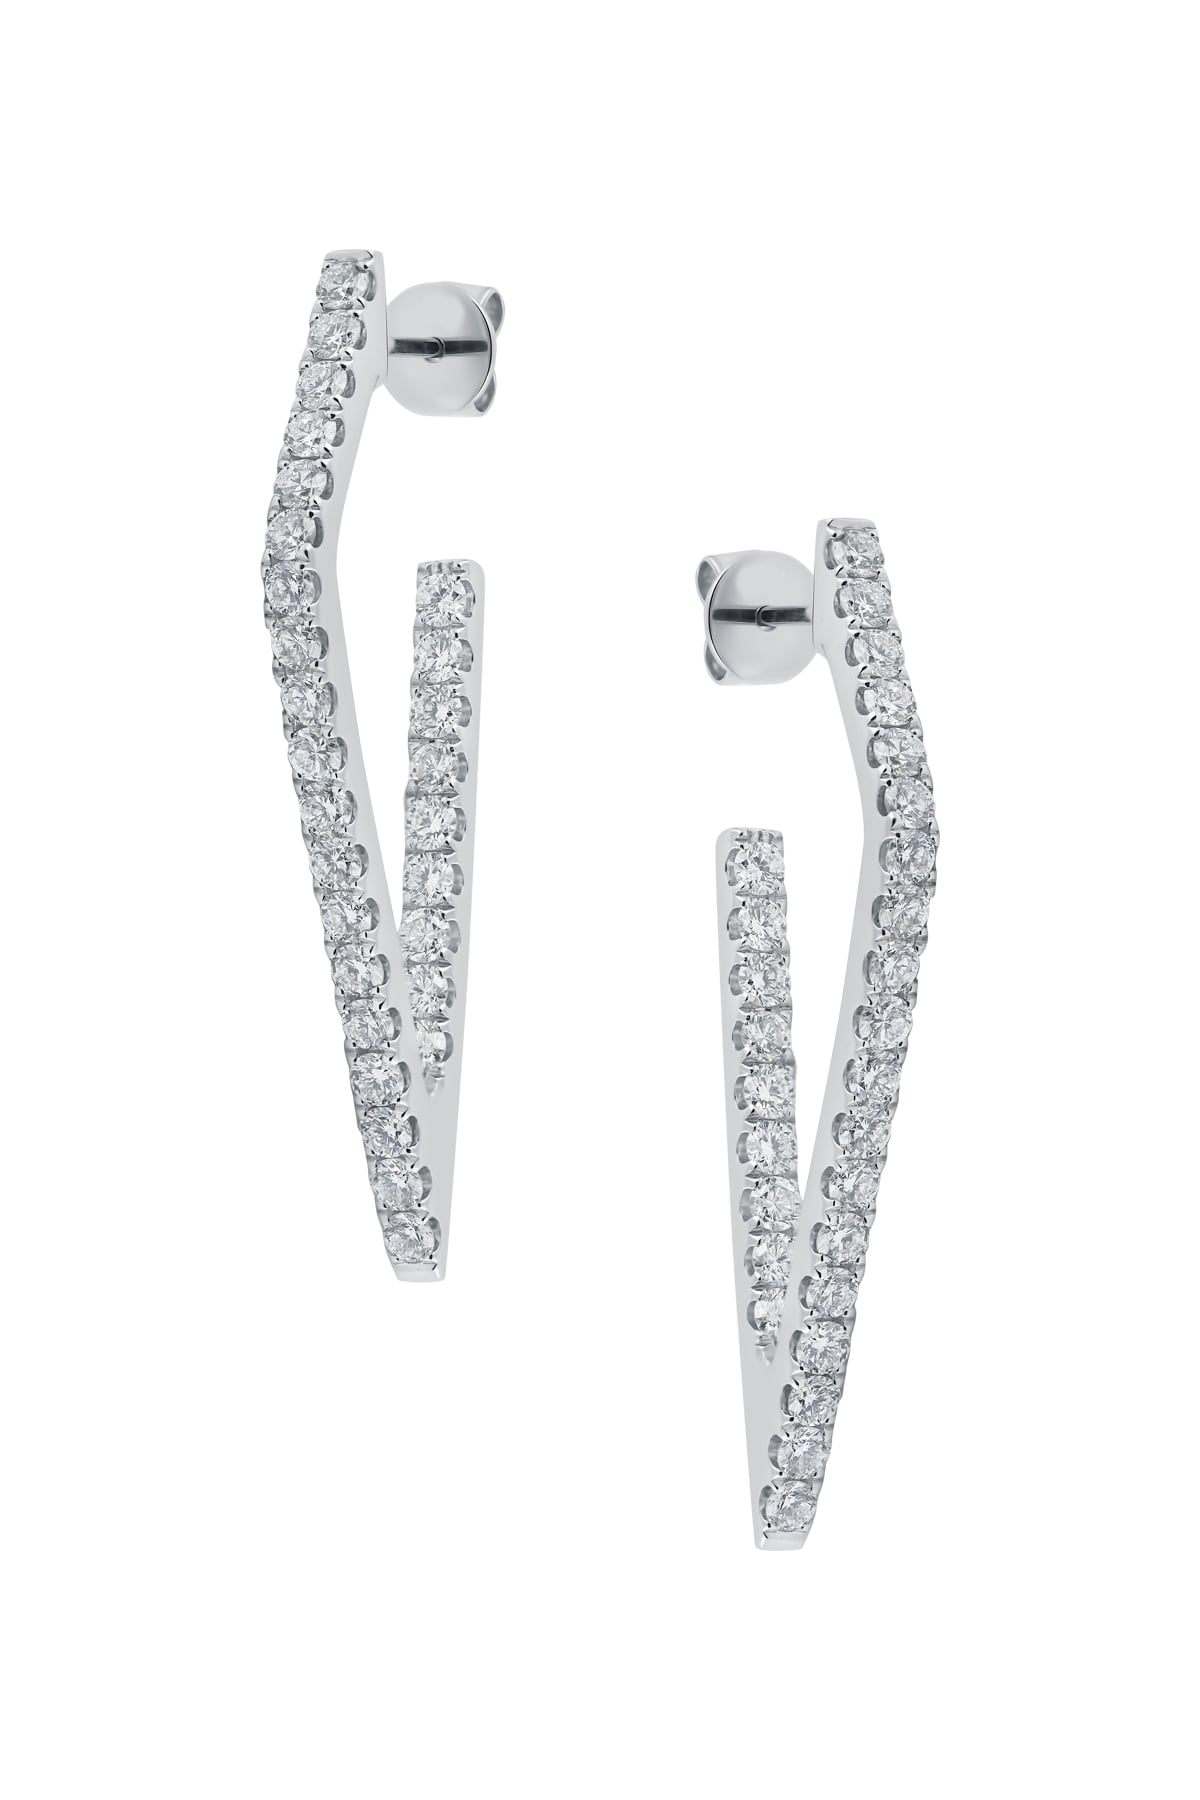 Long Triangular Shaped Diamond Drop Earrings In White Gold from LeGassick.